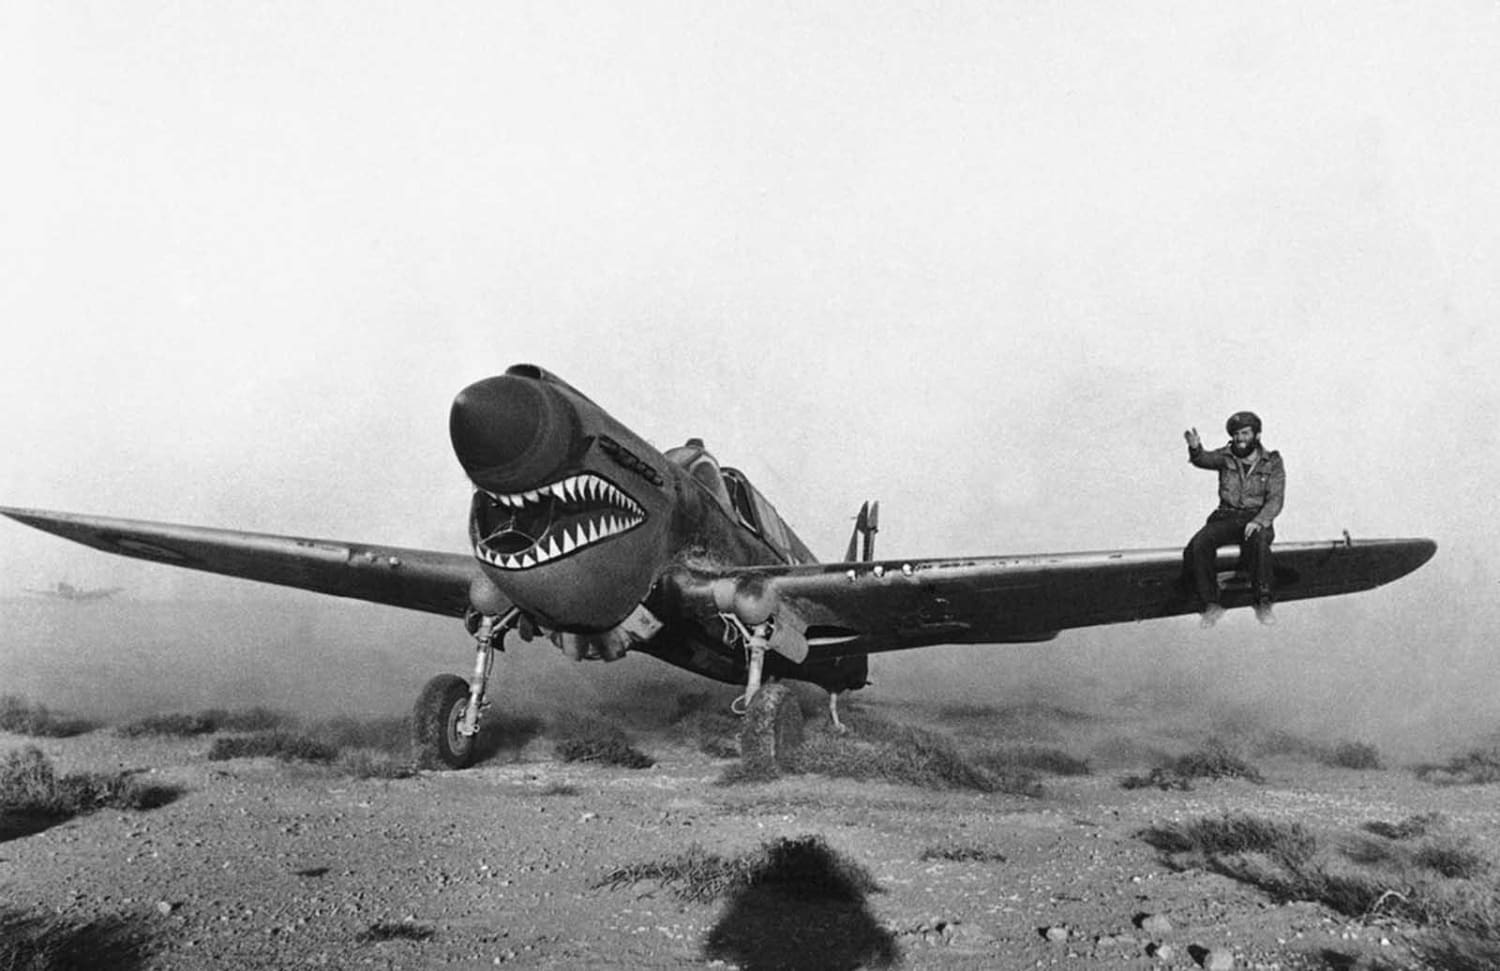 Experienced in desert weather flying, a British pilot lands an American made Kittyhawk fighter plane of the Sharknose Squadron in a Libyan Sandstorm, on April 2, 1942. A mechanic on the wing helps to guide the pilot as he taxis through the storm.